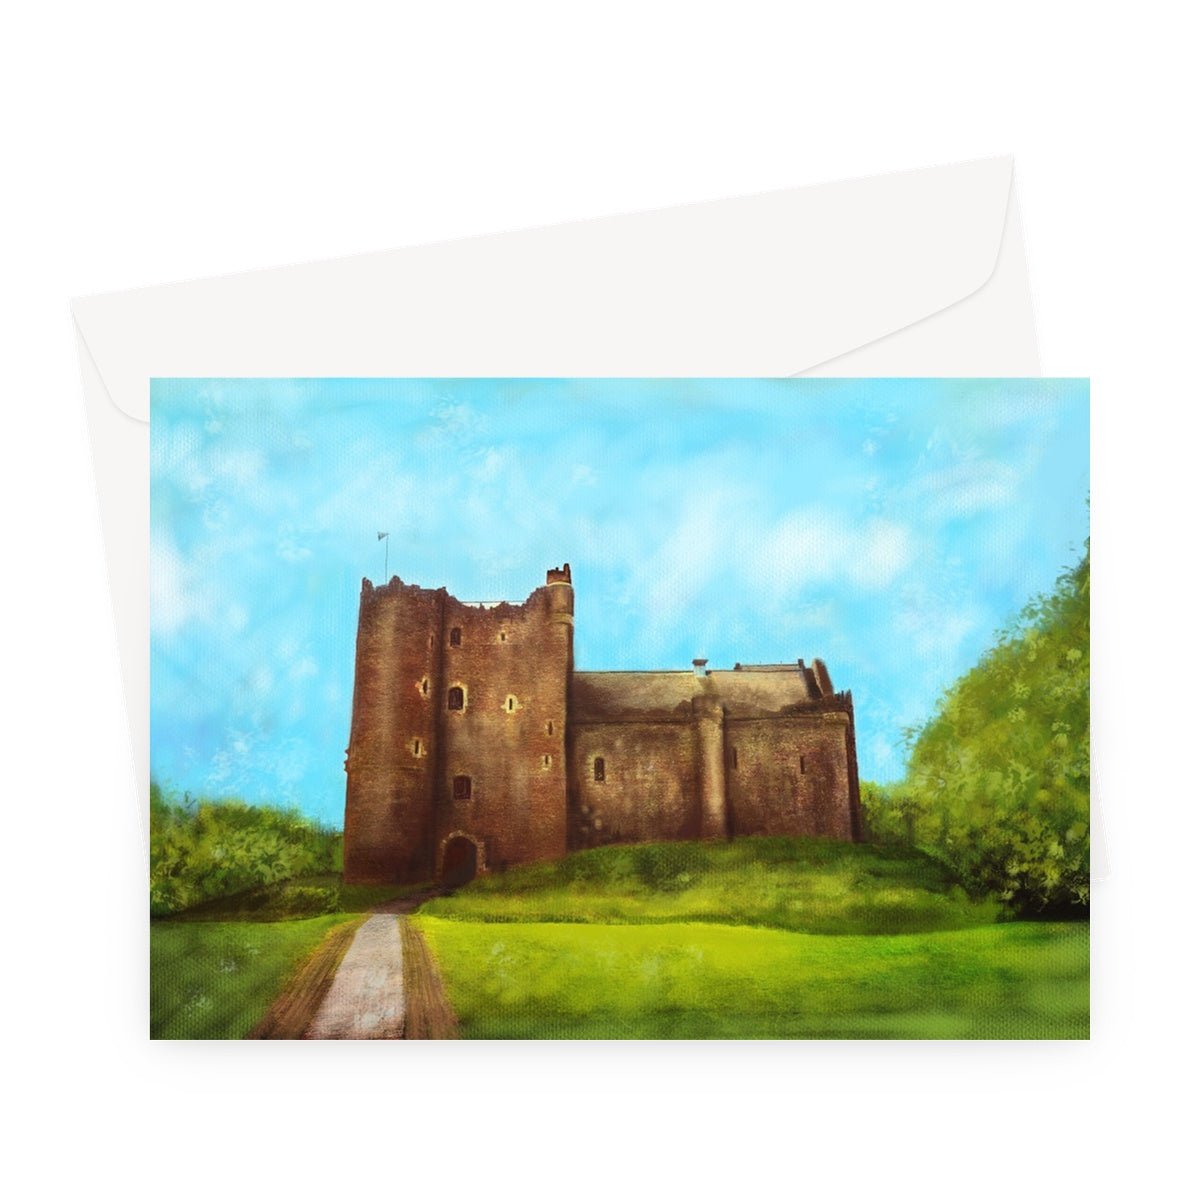 Doune Castle Art Gifts Greeting Card-Greetings Cards-Historic & Iconic Scotland Art Gallery-A5 Landscape-1 Card-Paintings, Prints, Homeware, Art Gifts From Scotland By Scottish Artist Kevin Hunter